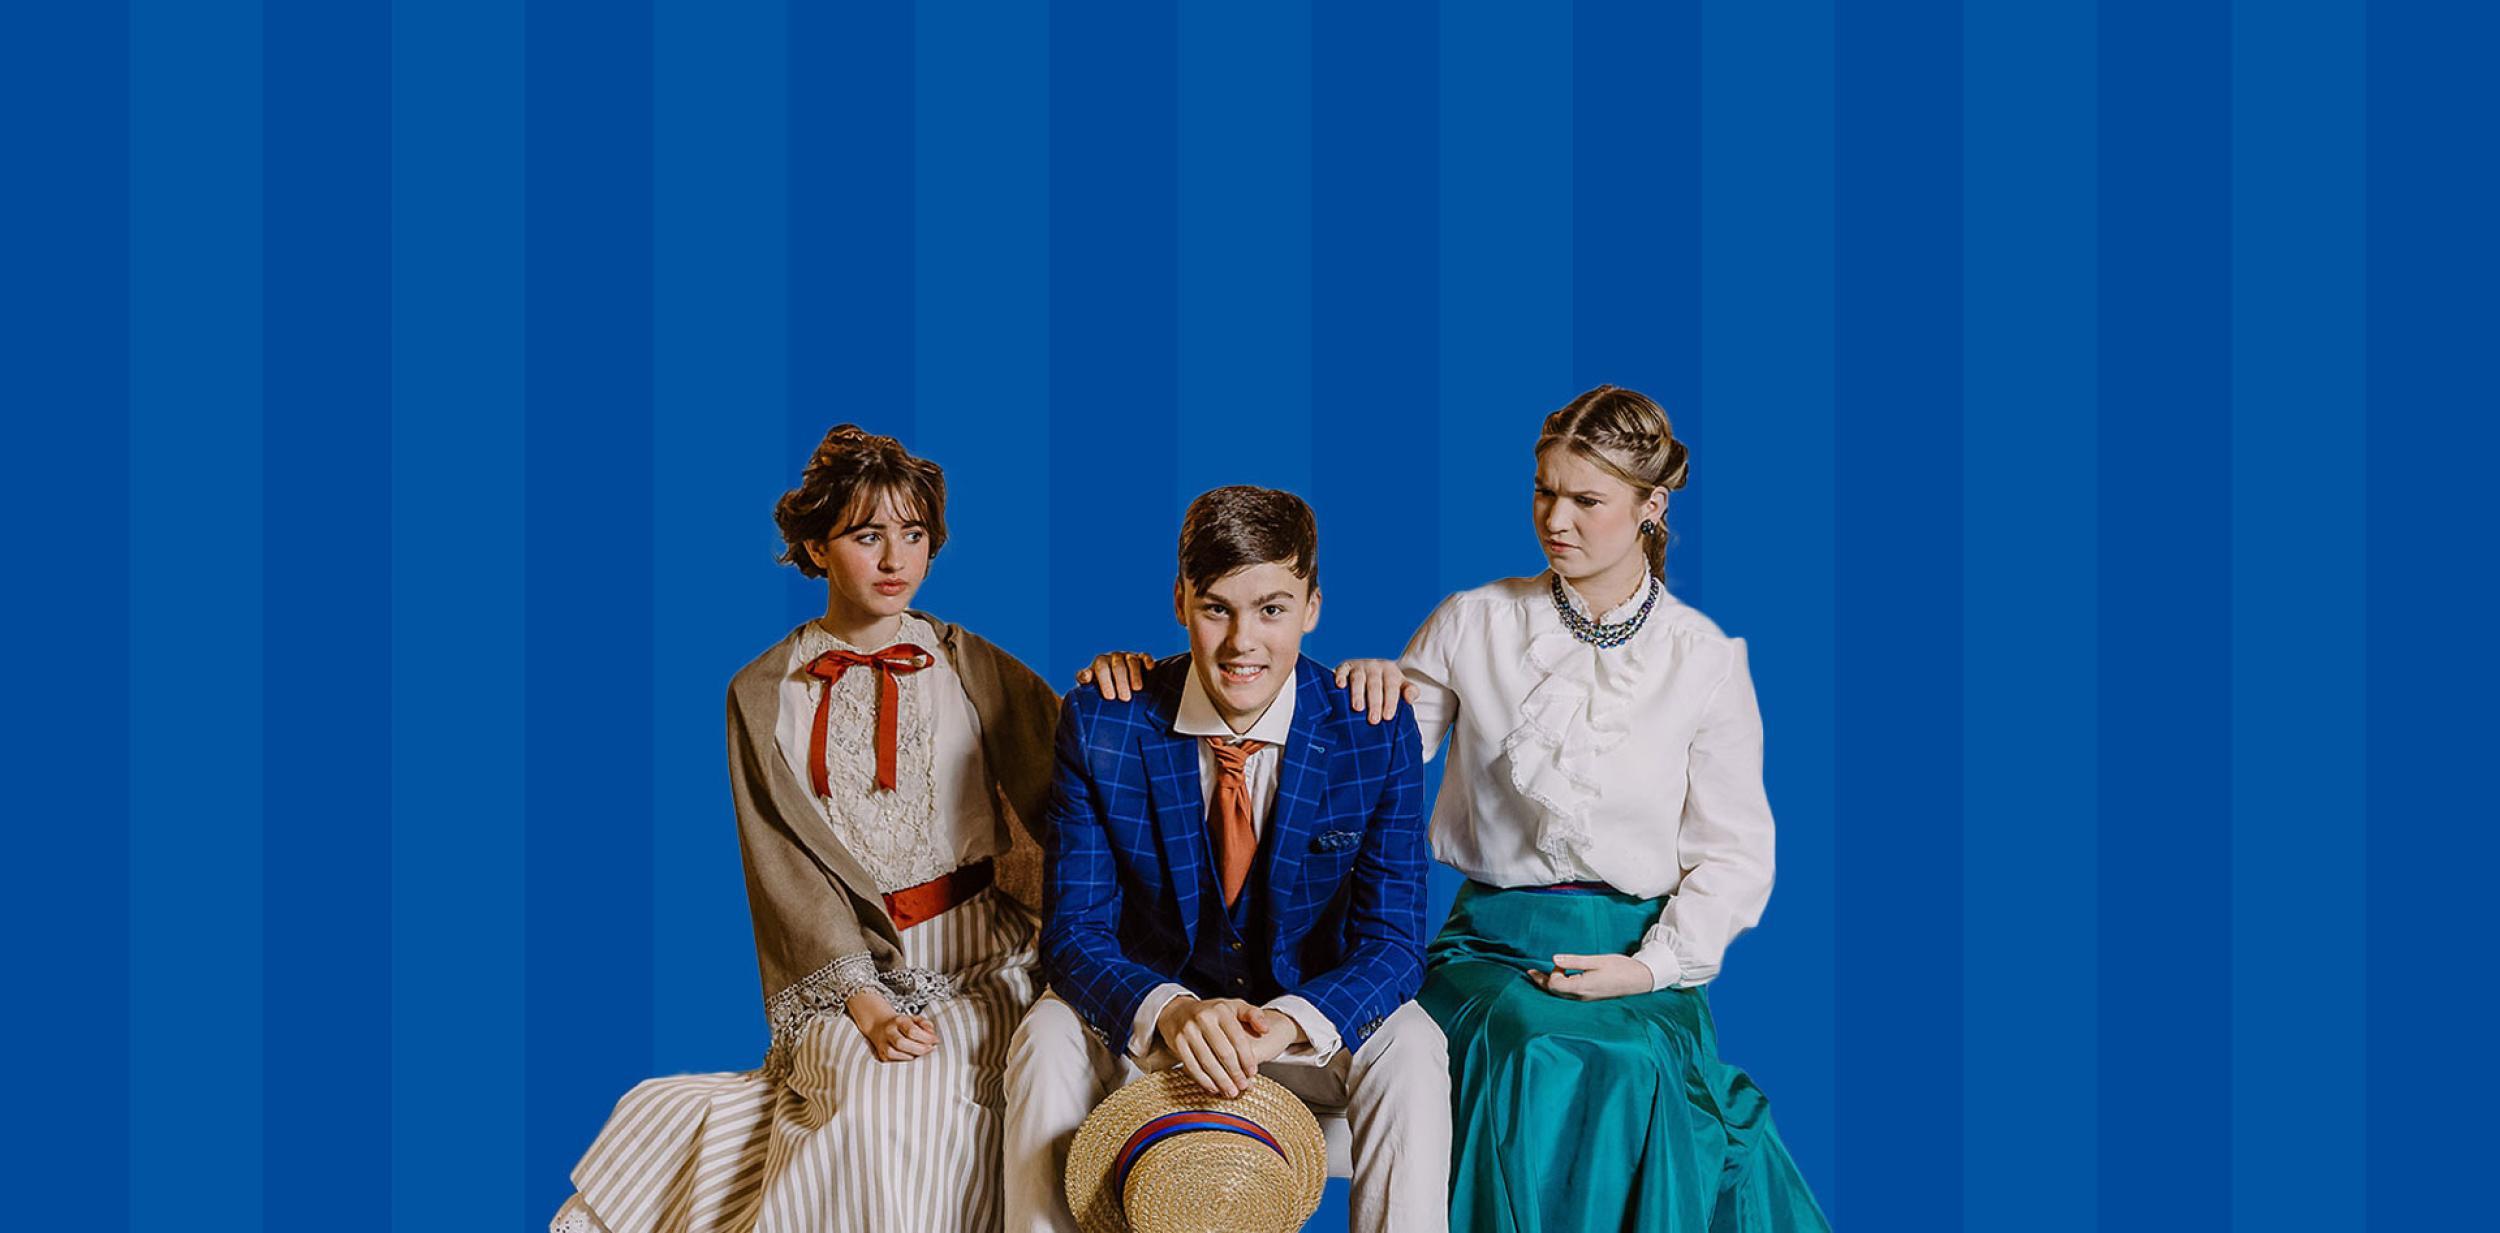 Three young people in period costume